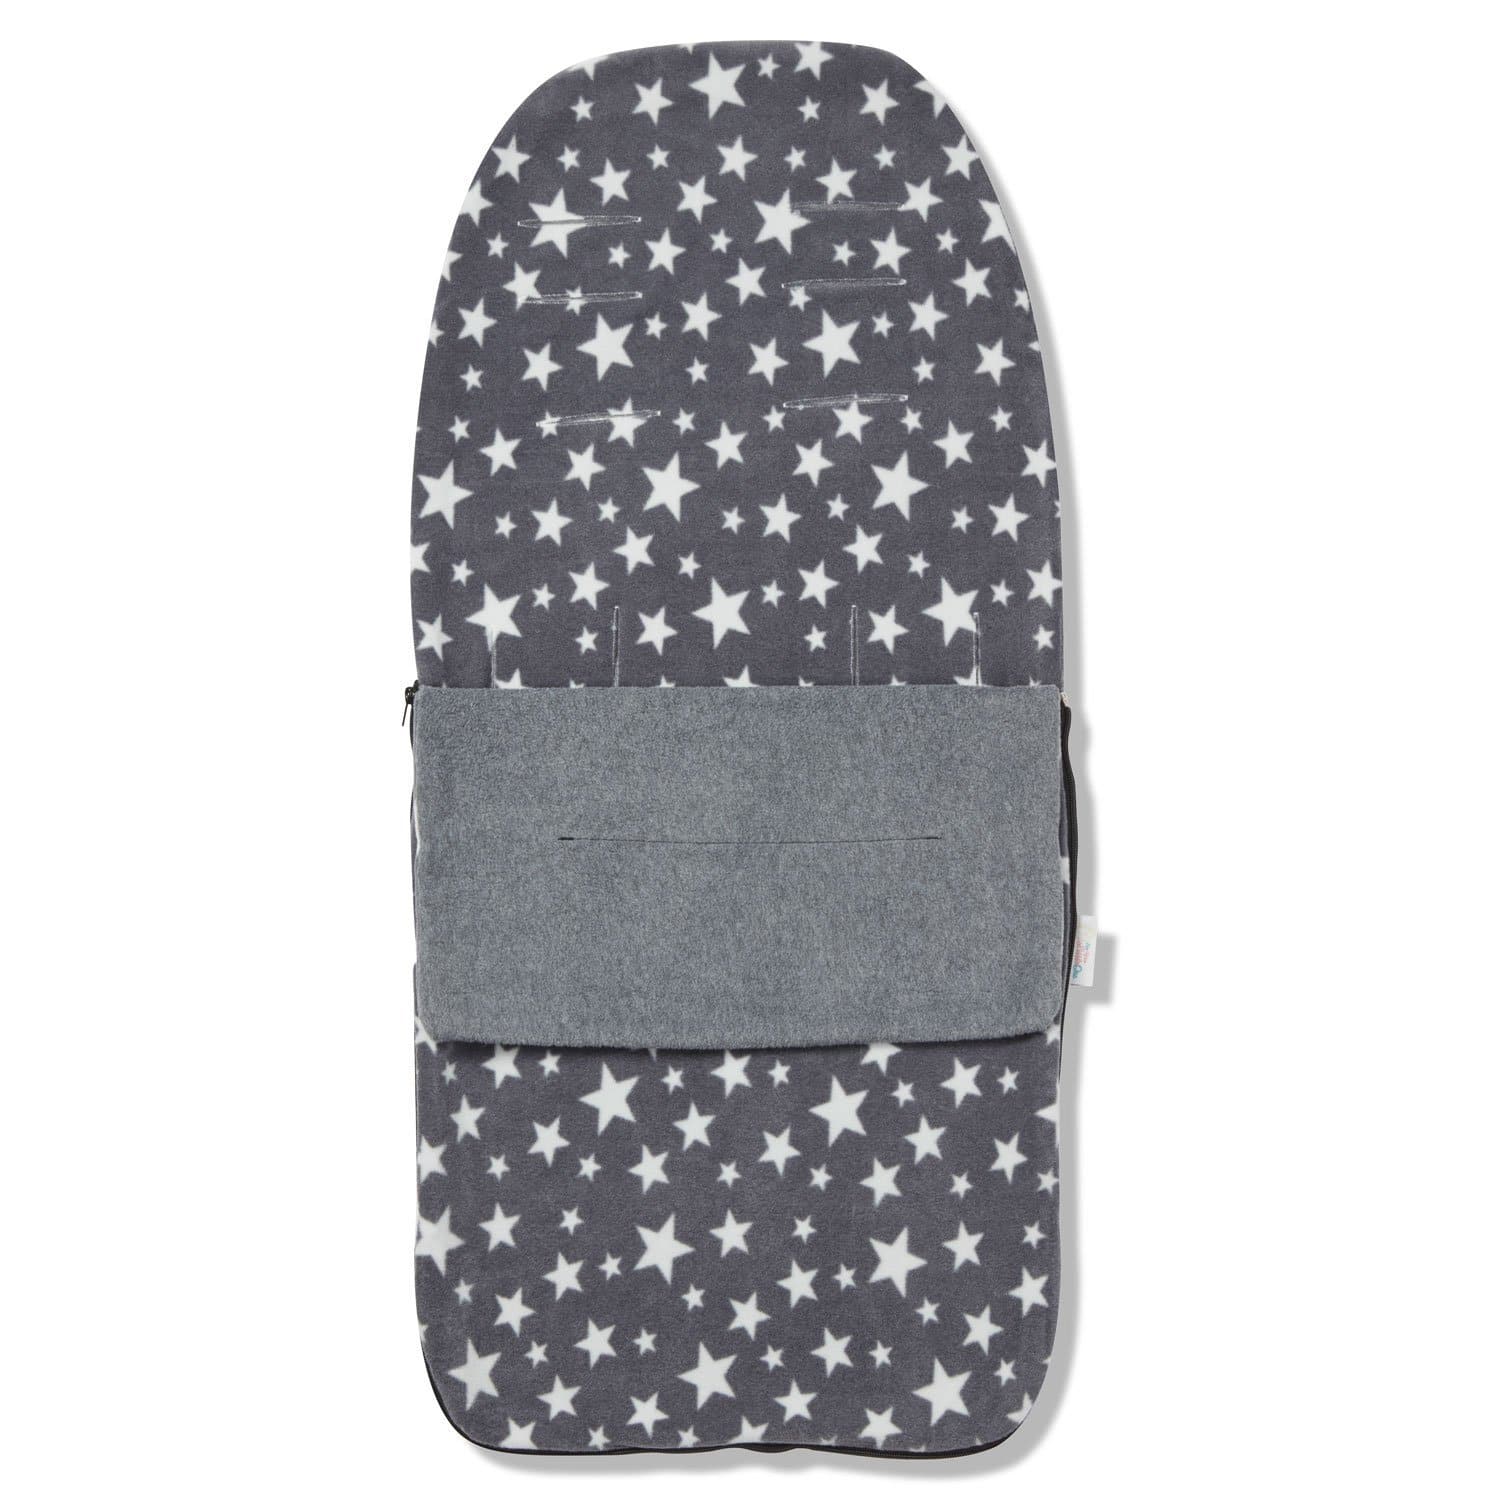 Snuggle Summer Footmuff Compatible with Inglesina - For Your Little One